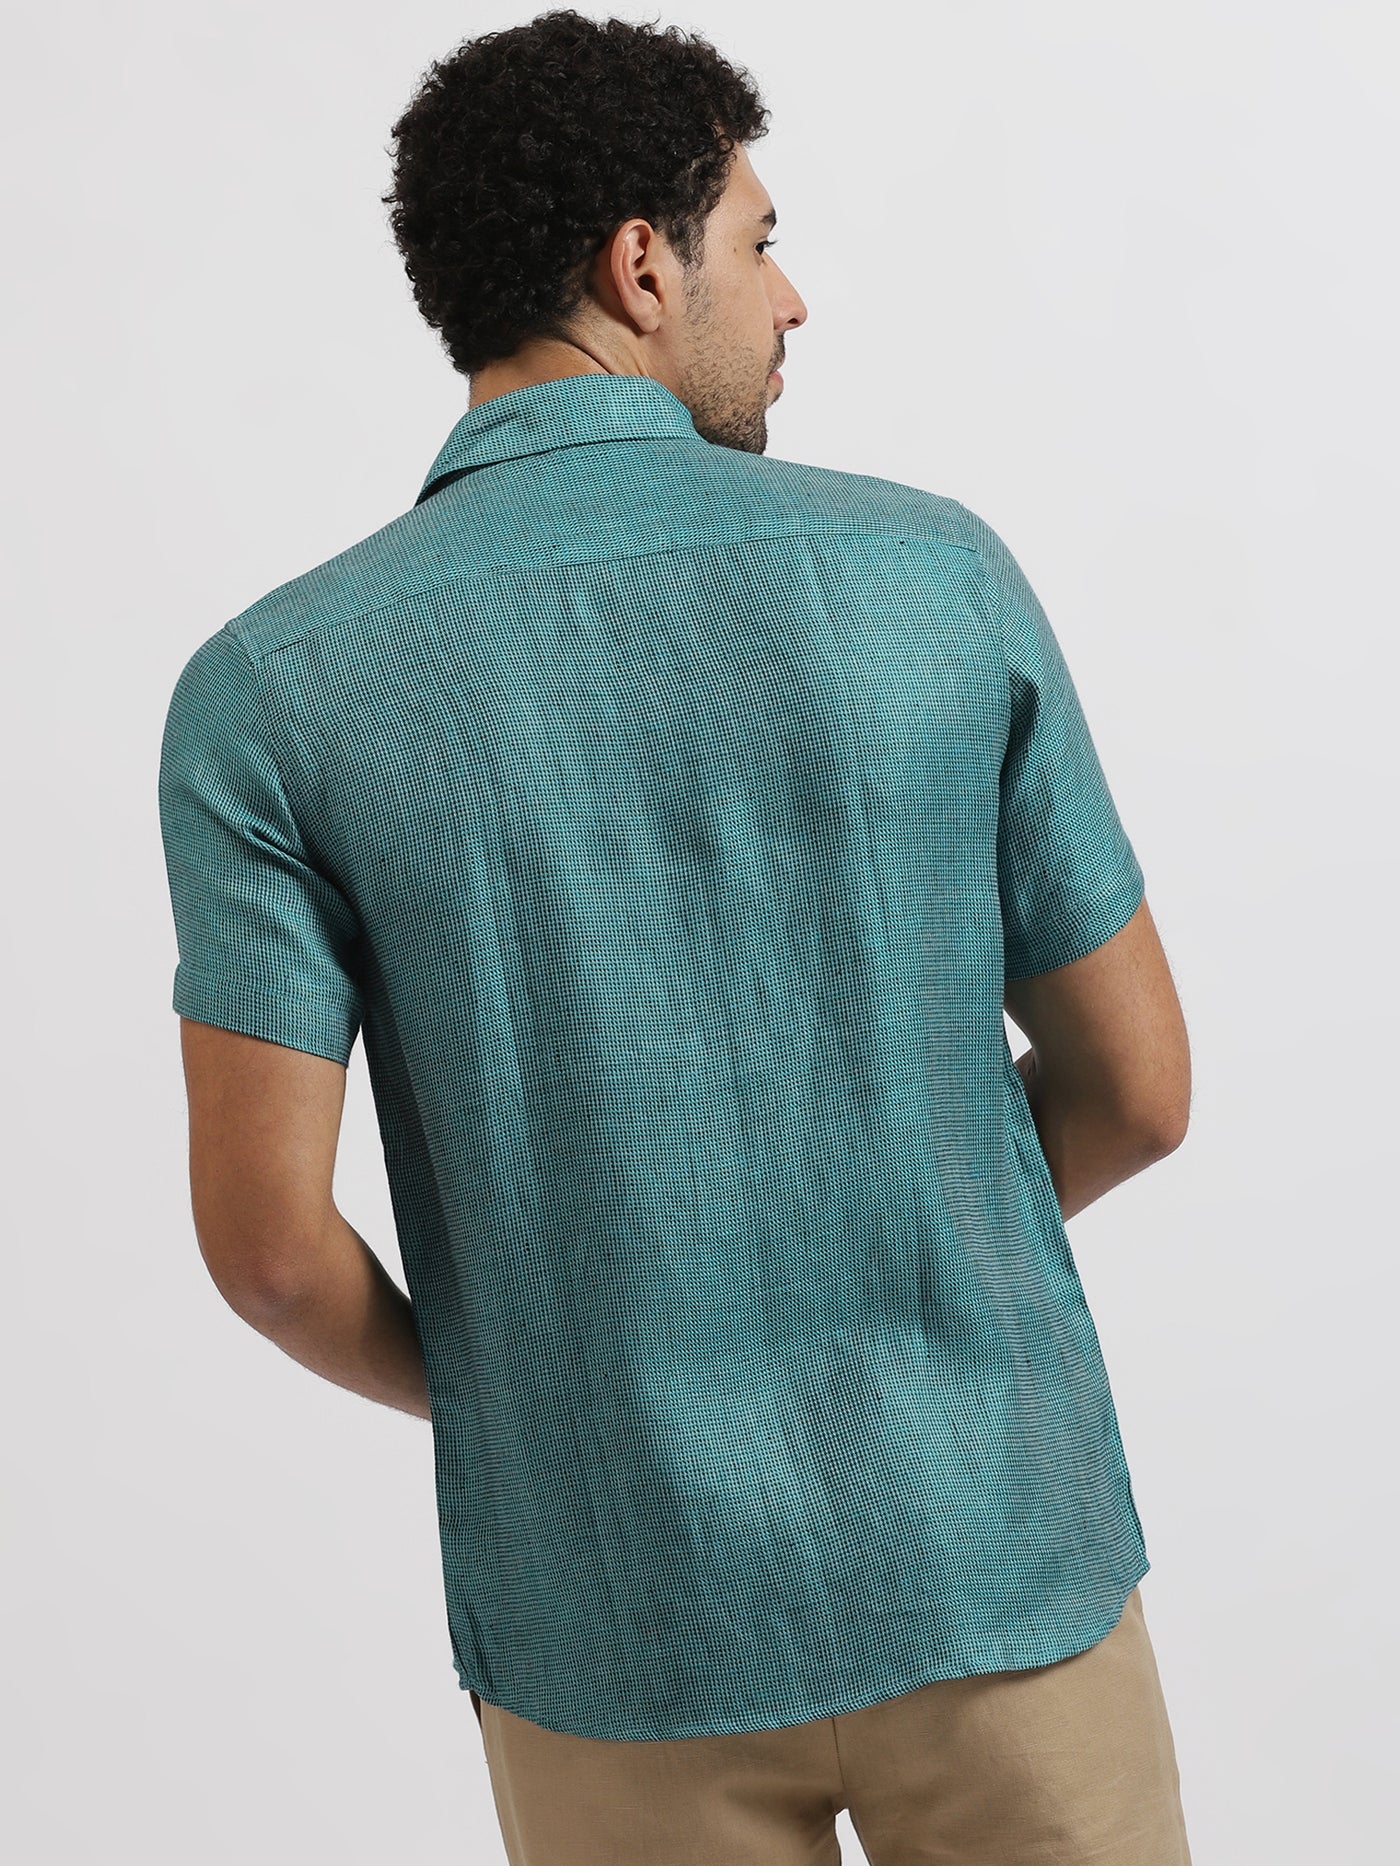 Carlose - Pure Linen Half Sleeve Shirt - Turquoise Blue Houndstooth